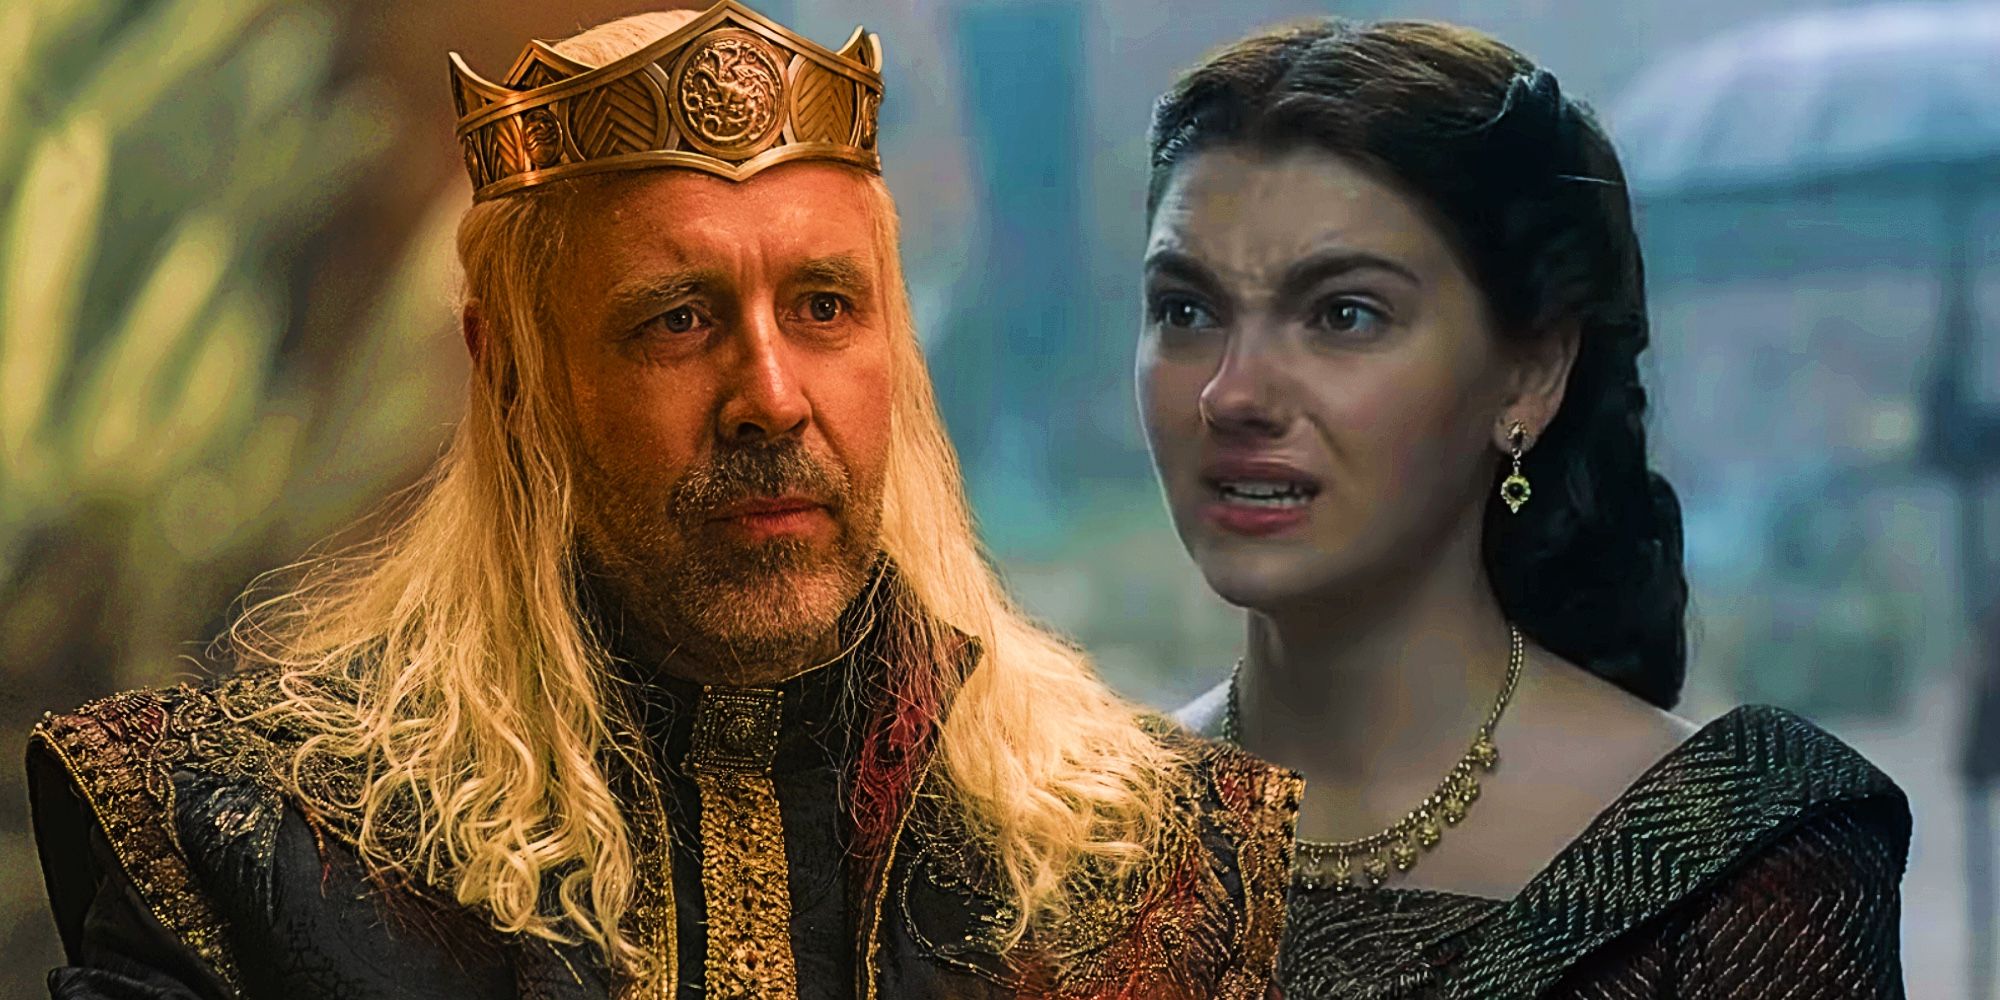 Paddy Considine as King Viserys and Emily Carey as Alicent Hightower in House Of The Dragon Episode 5